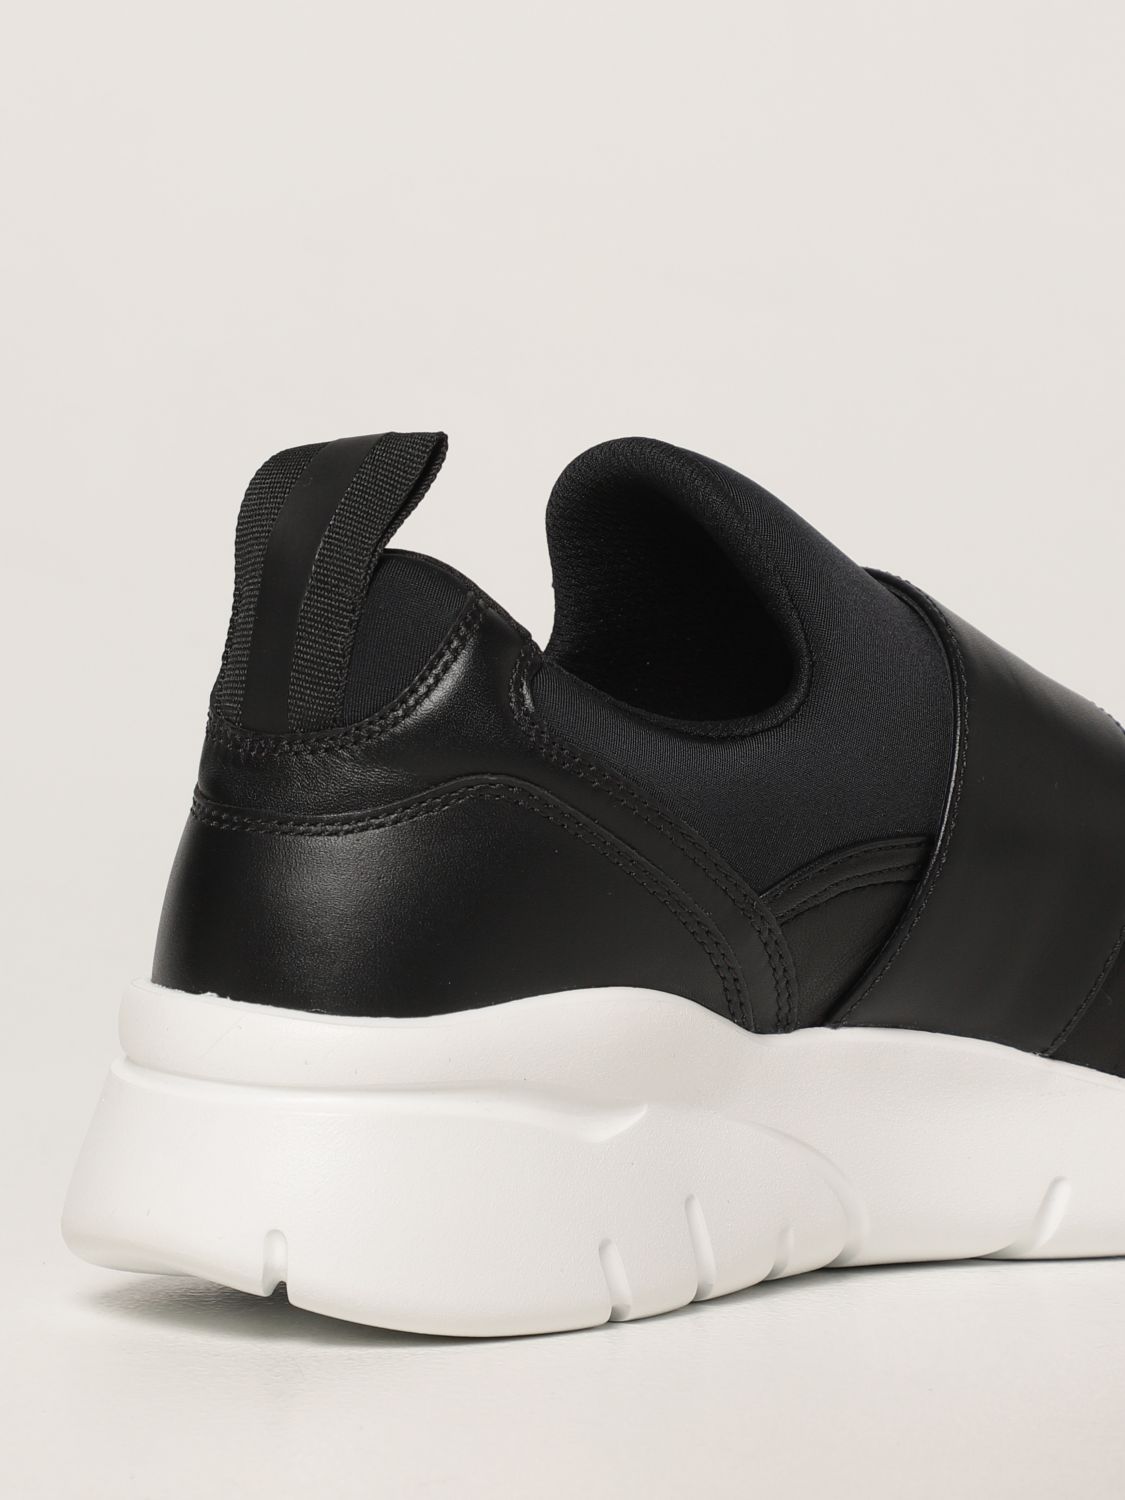 BALLY: Brinelle sneakers in leather and neoprene - Black | Bally ...